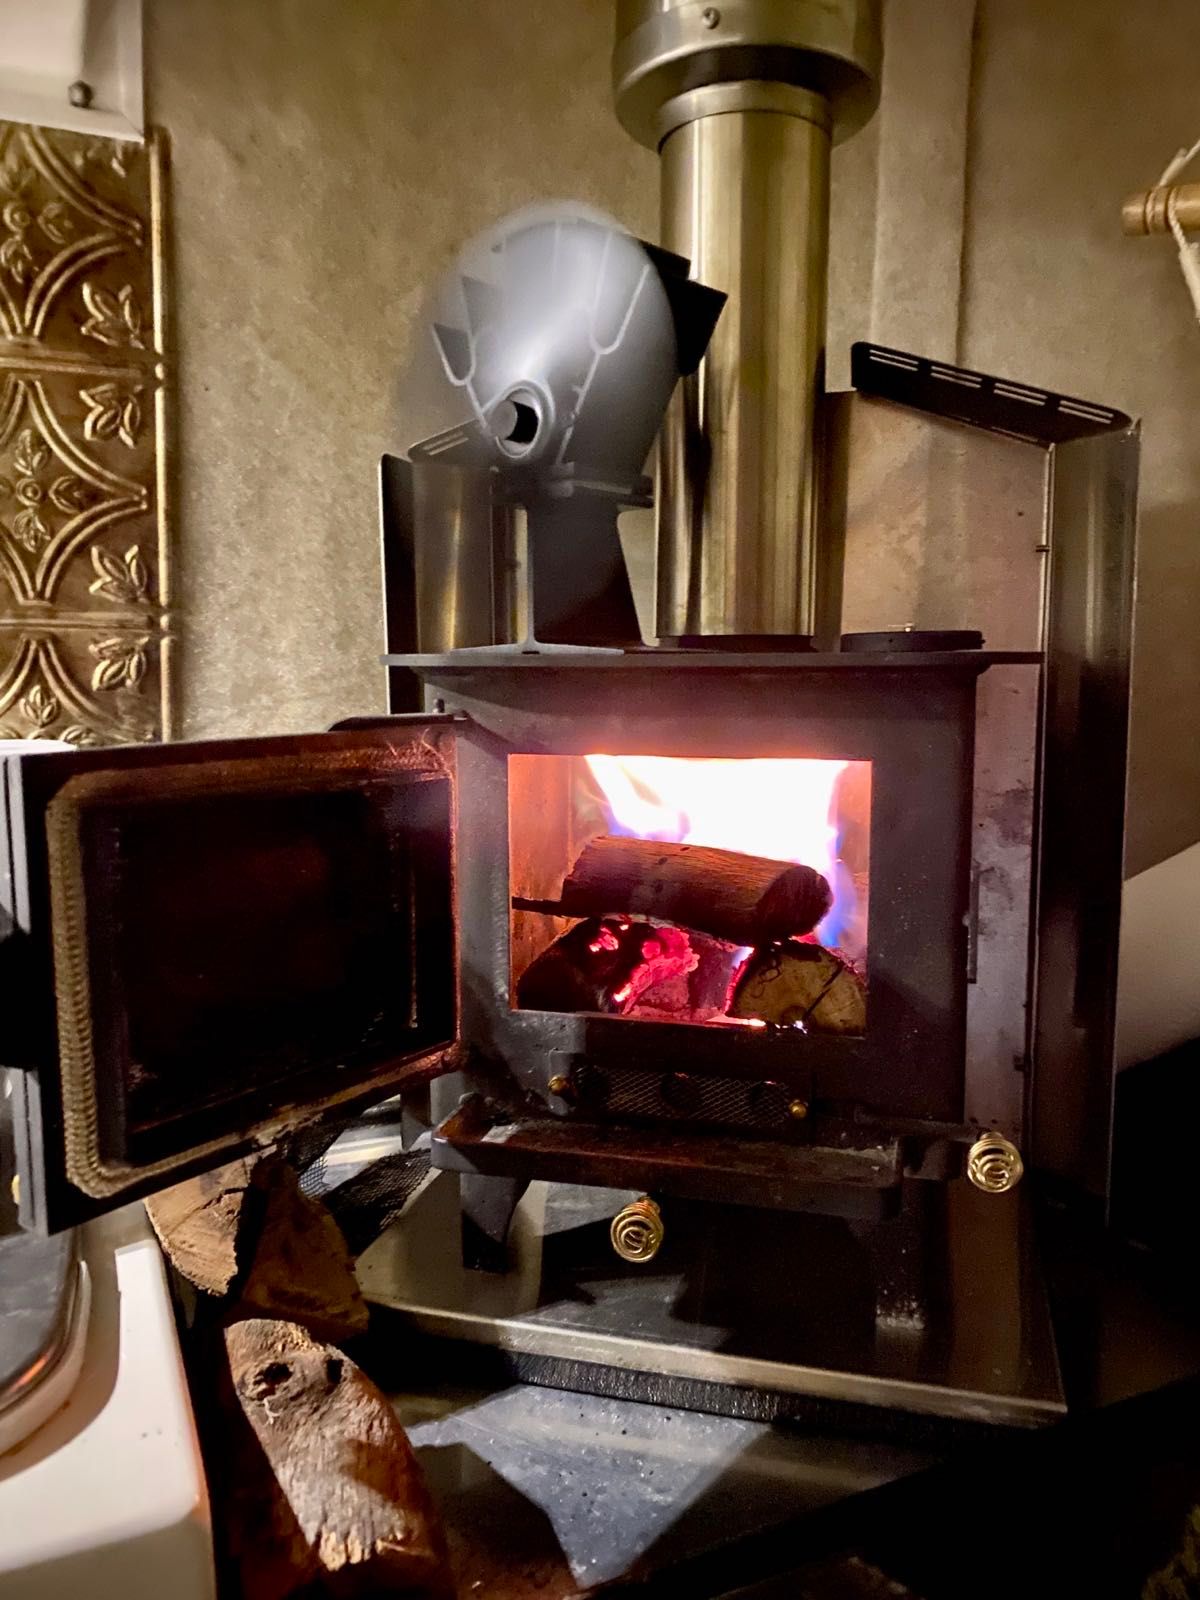 One of life’s pleasures is a wood burning stove in the camper on cold nights. Mmm toasty. Marshmallows?